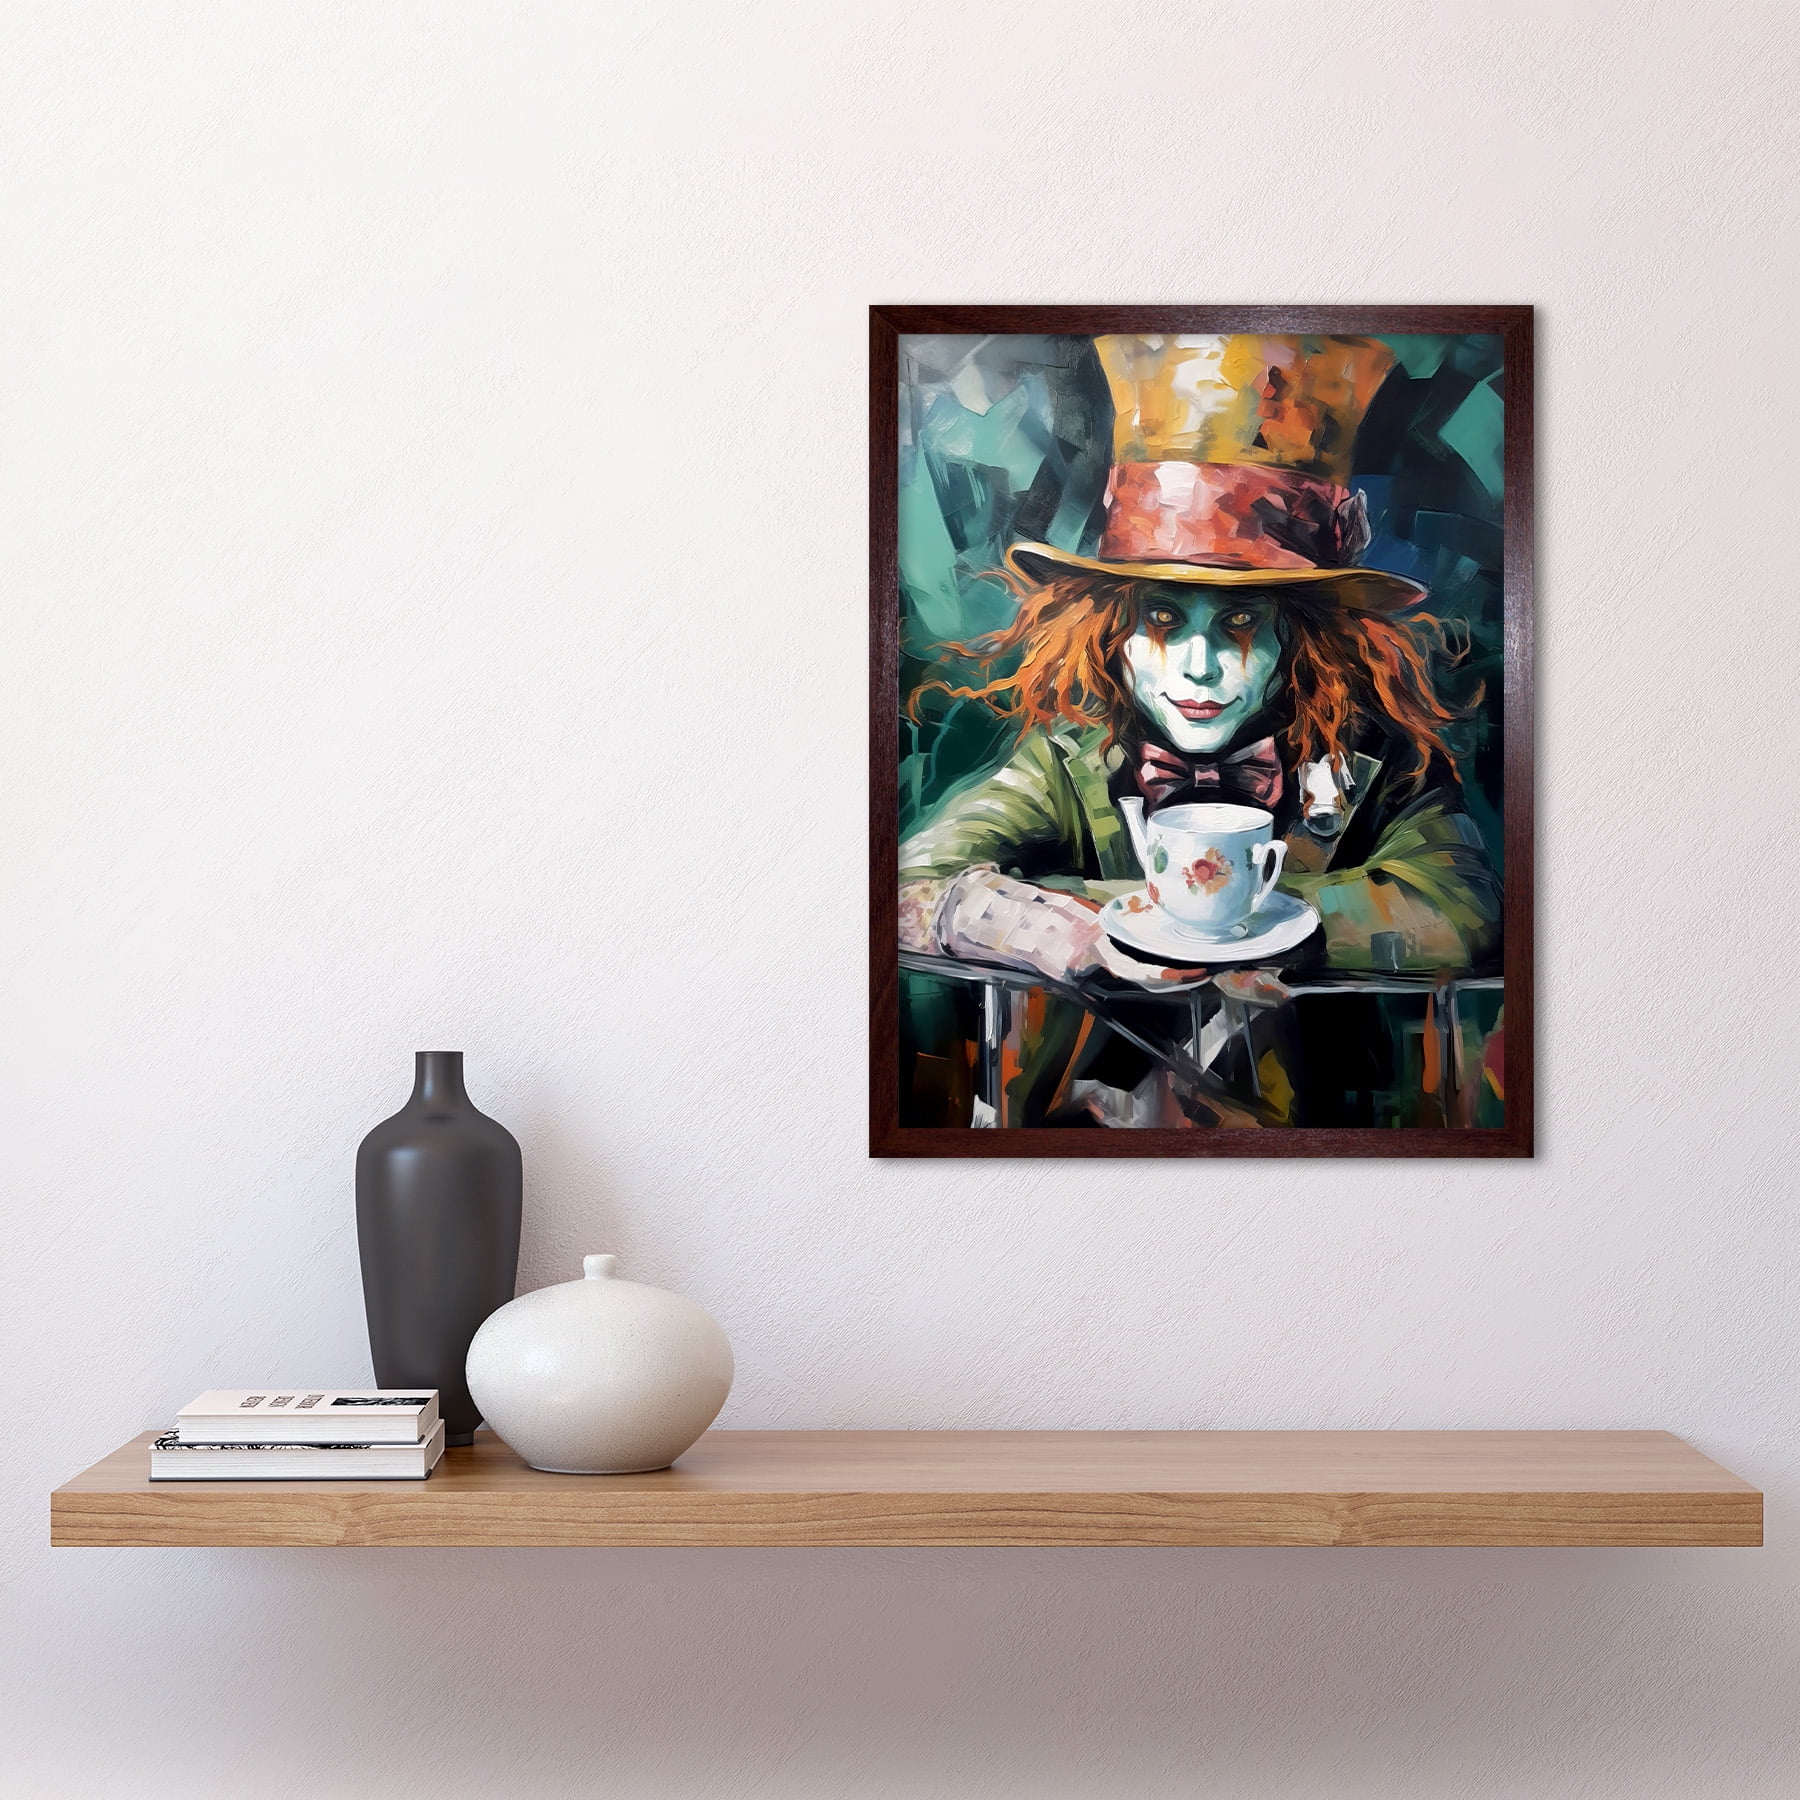 Alice in Wonderland Prints - 11x14 Unframed Wall Art Print Poster - Perfect  Alice in Wonderland Gifts and Decorations (Mad Tea Party)